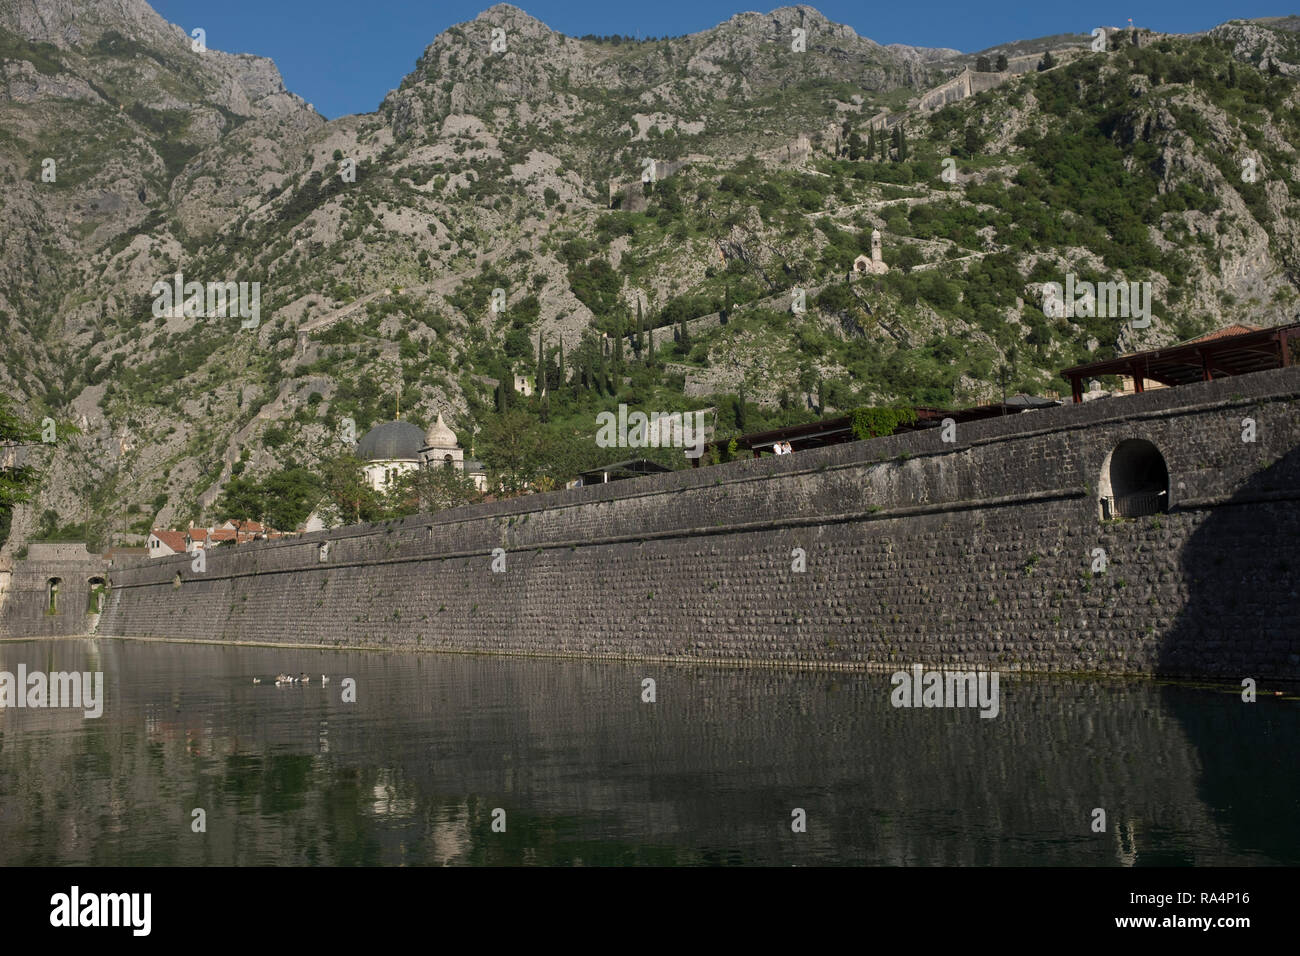 Fortifications protected the medieval town of in Kotor Montenegro in ancient time sna d remains a tourist attraction. Stock Photo